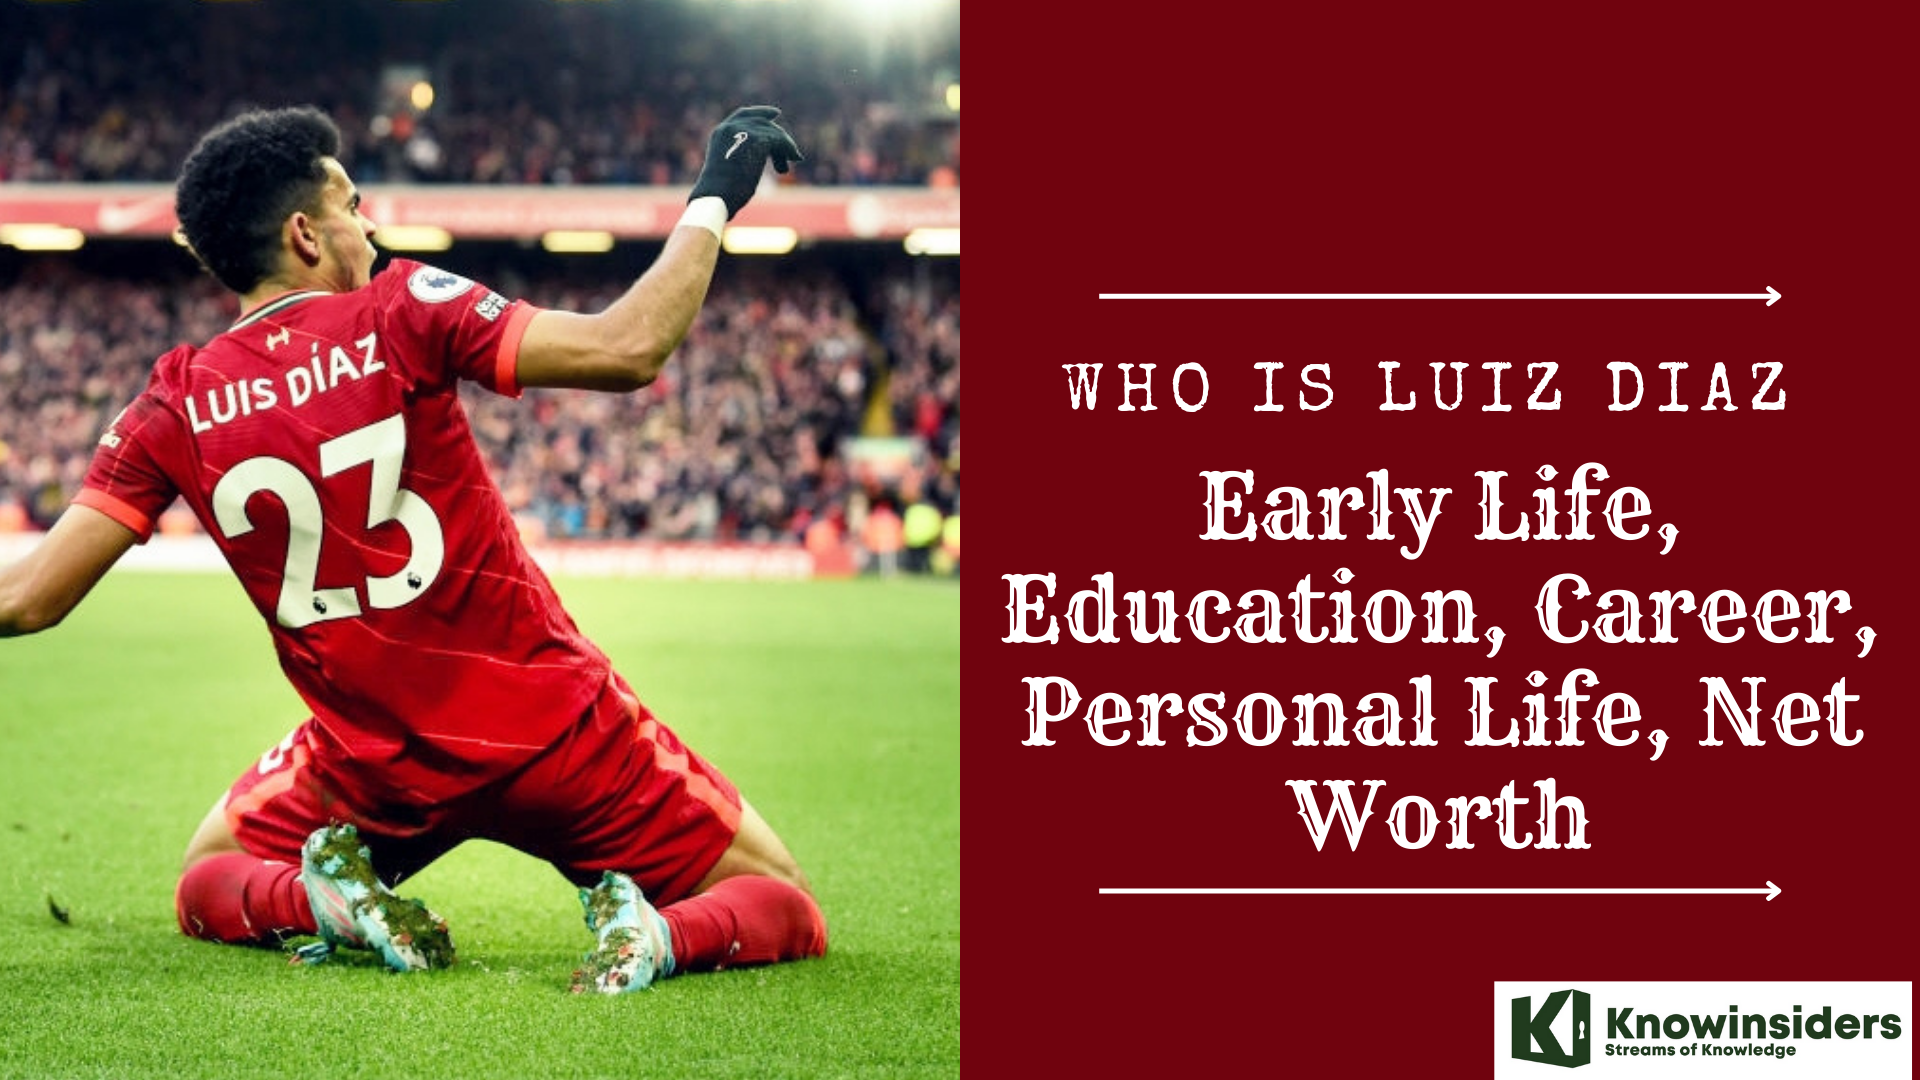 Who Is Luis Diaz: Early Life, Education, Career, Personal Life, Net Worth